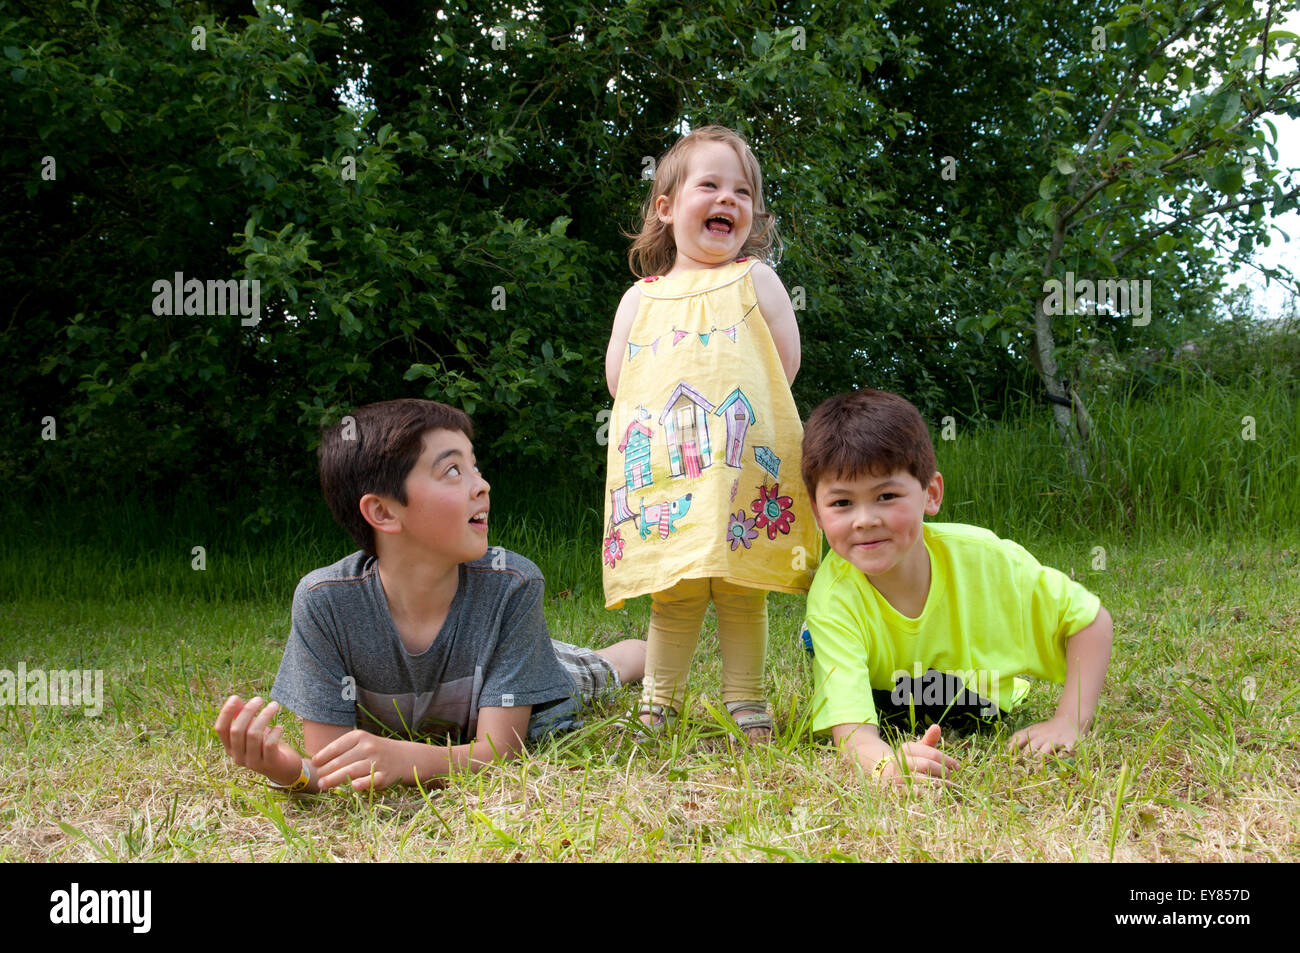 Little girl laughing, standing between two boys who are lying on their fronts Stock Photo